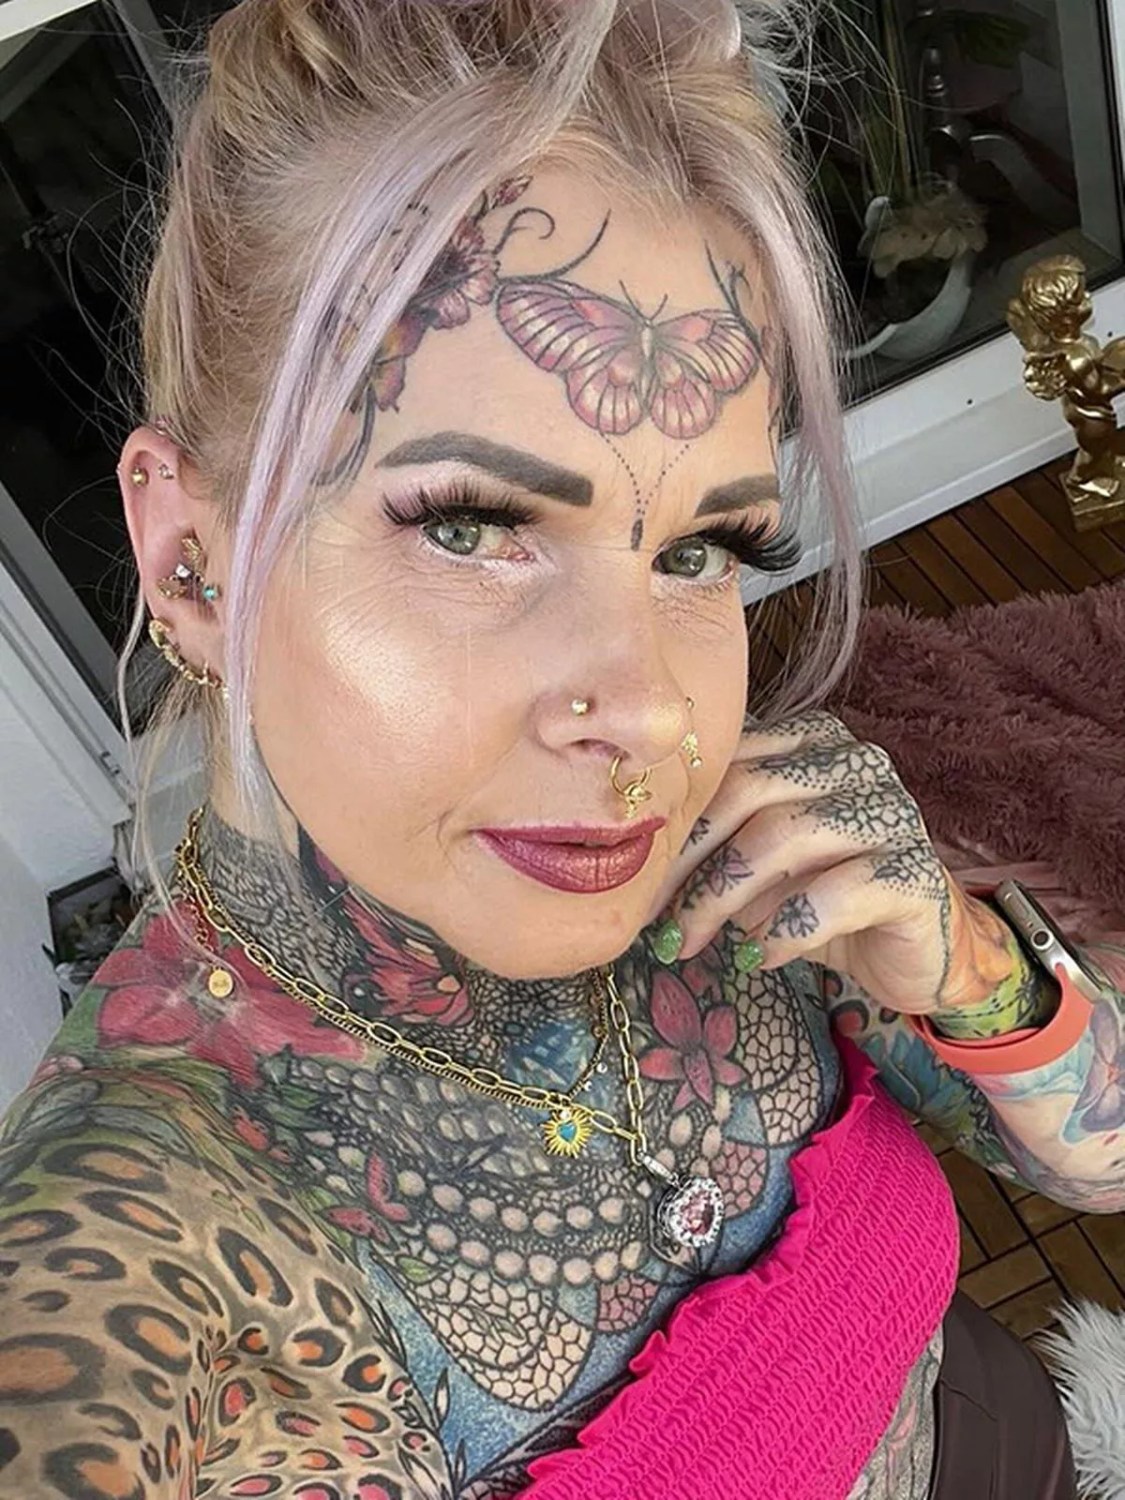 Tattooed Granny Called Breathtaking As She Reveals Her Vibrant Body